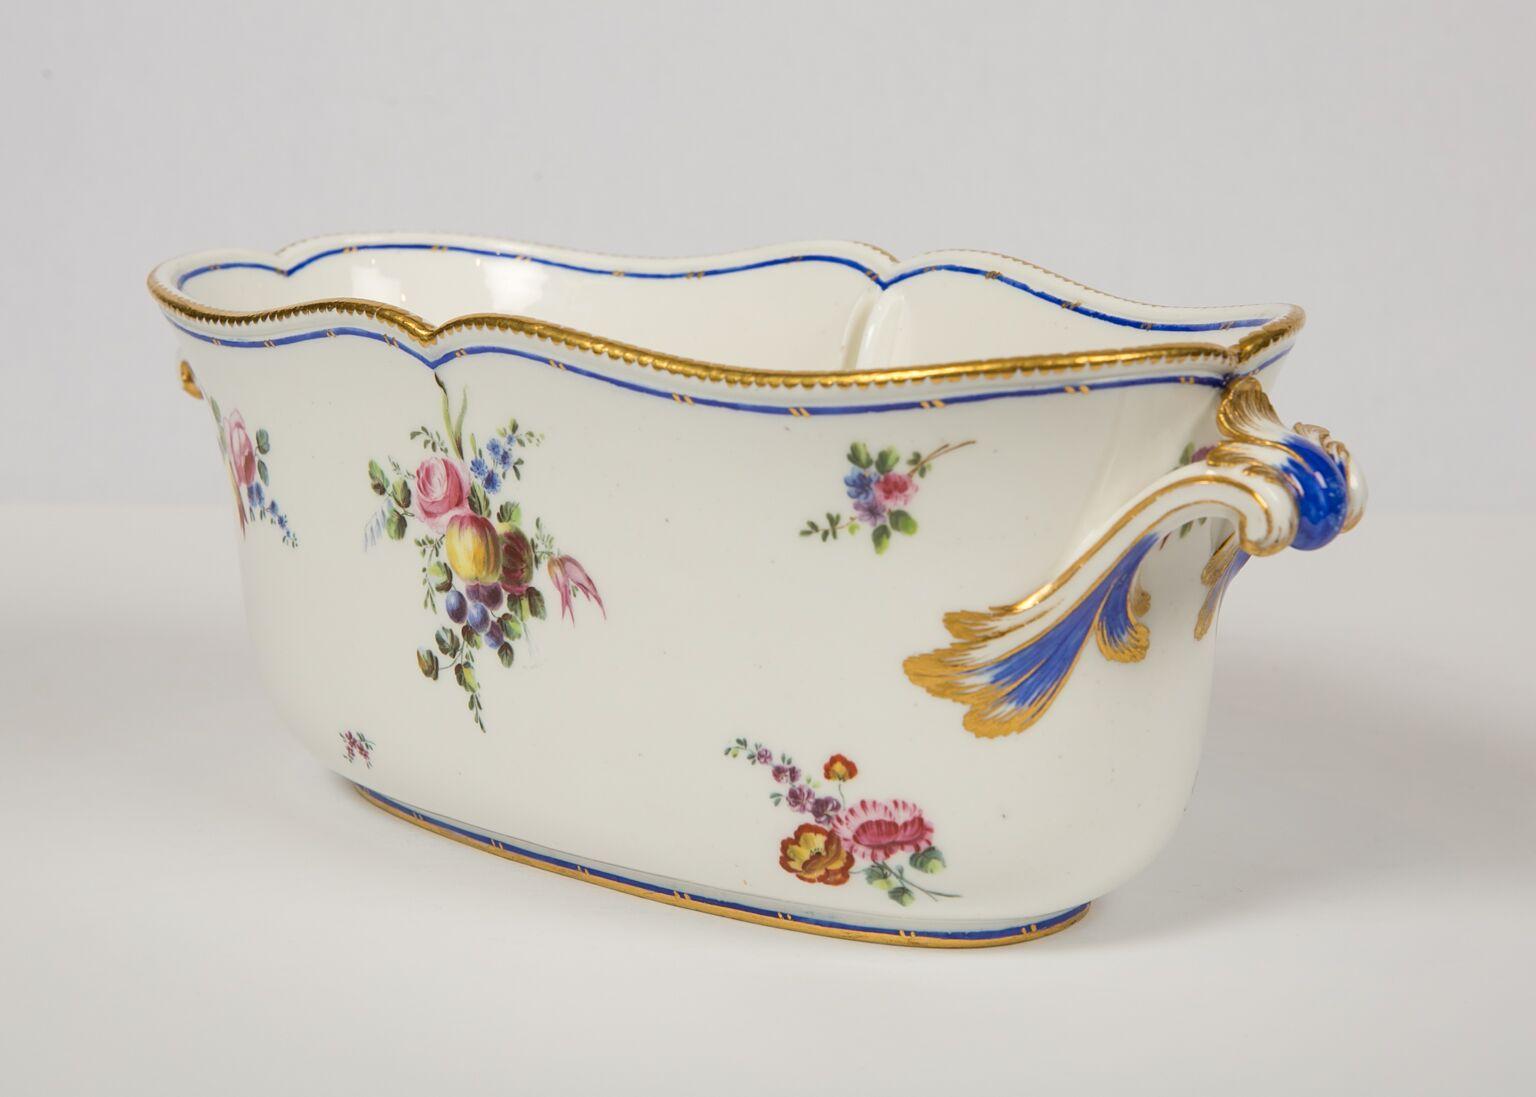 18th Century French Porcelain Vincennes Bottle Cooler Made 1752-1753 Later Known as Sèvres